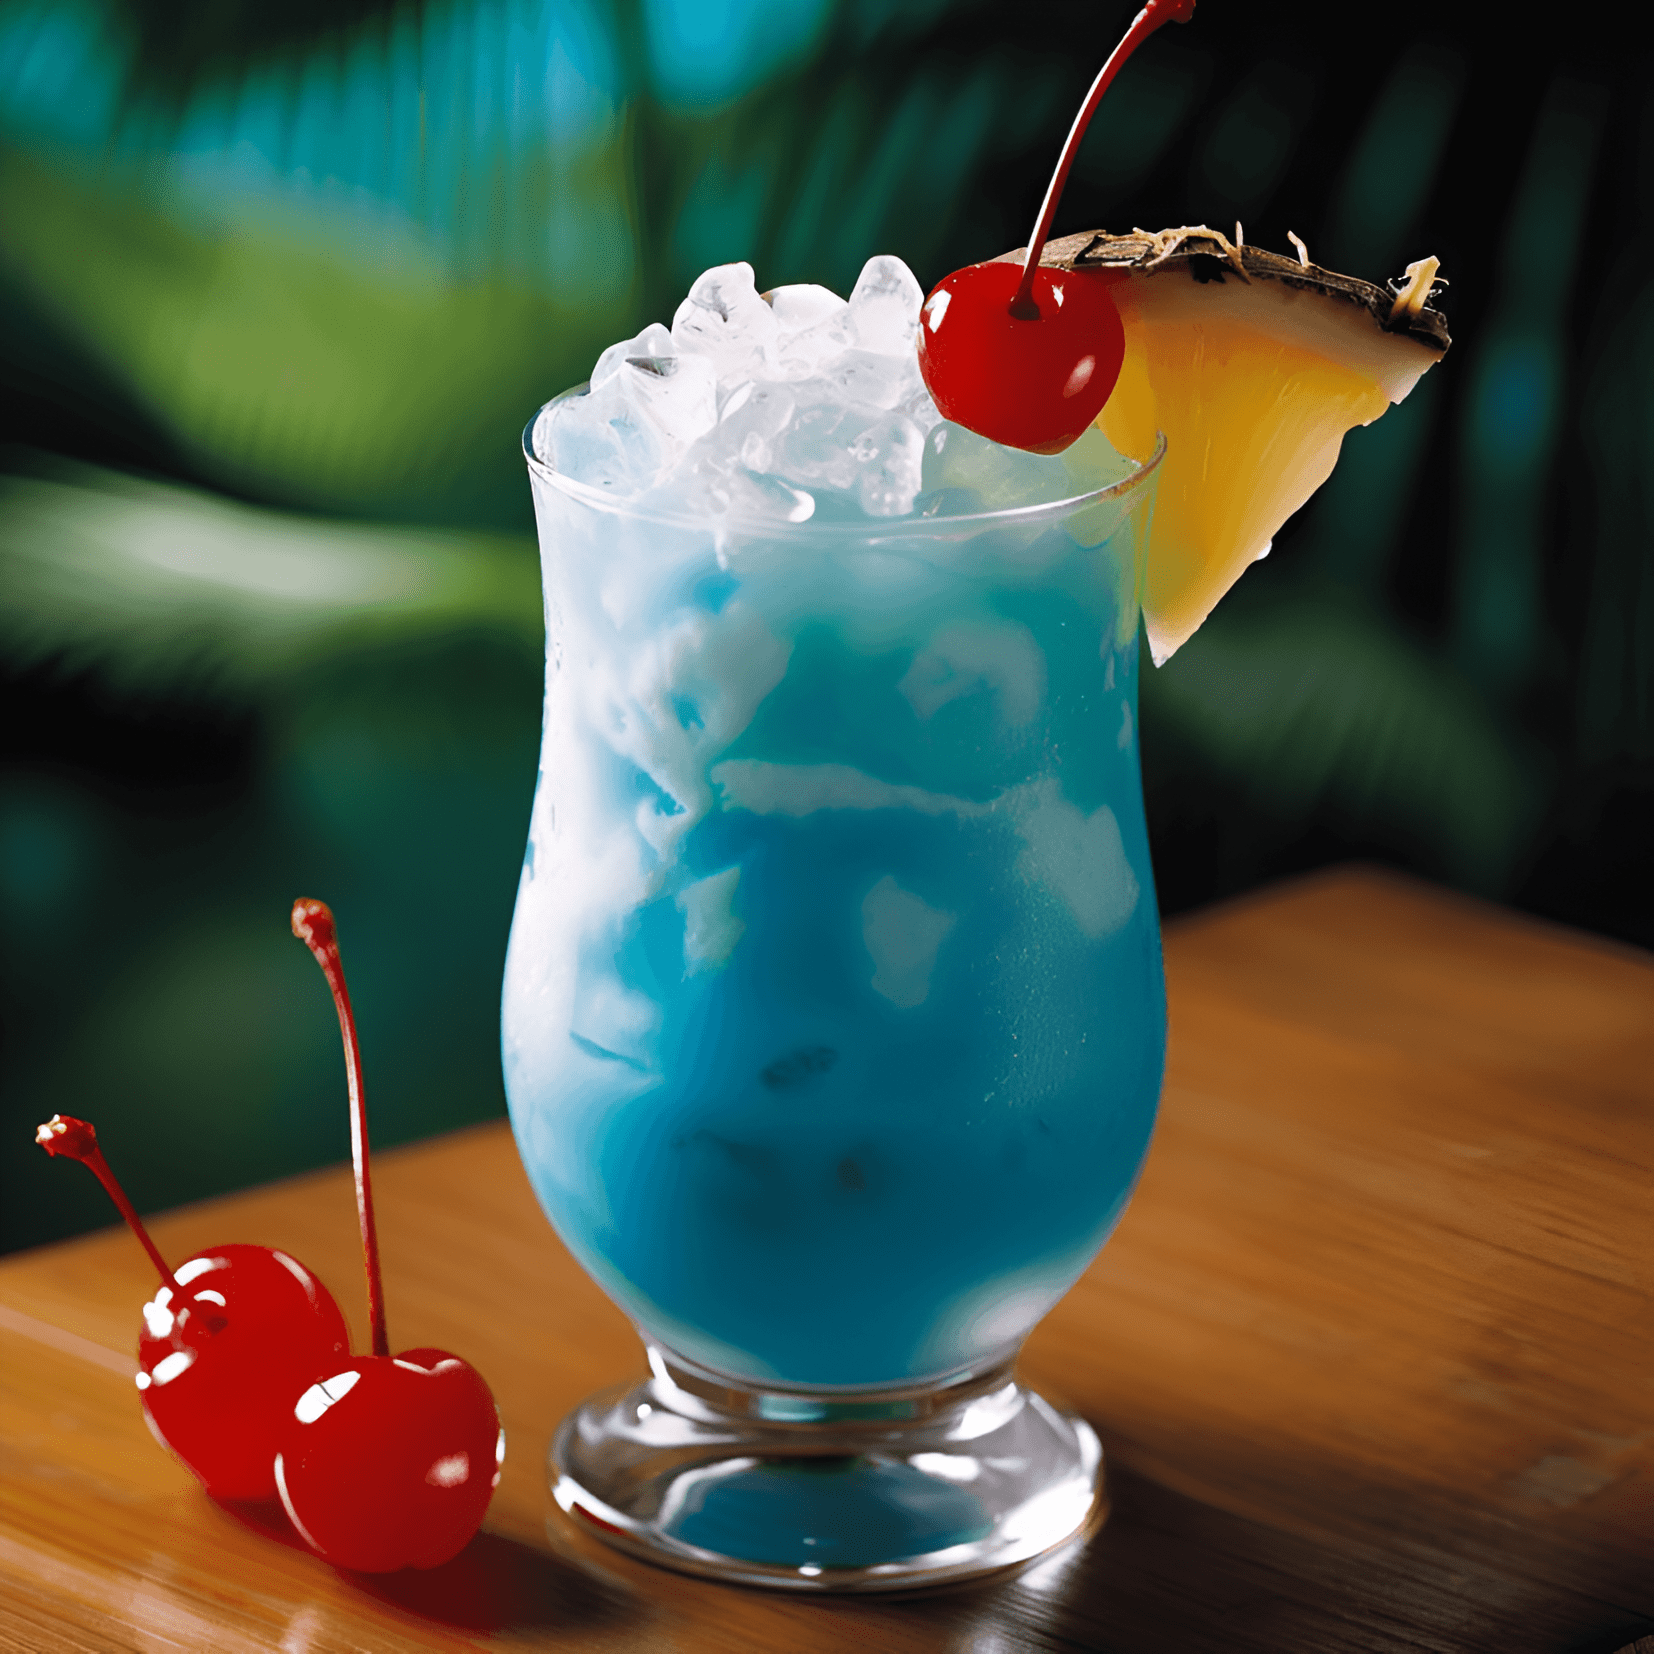 Blue Hawaii Cocktail Recipe - The Blue Hawaii cocktail has a refreshing, sweet, and slightly tangy taste. The combination of pineapple juice, sweet and sour mix, and Blue Curaçao creates a fruity and tropical flavor profile, while the vodka and light rum add a subtle kick.